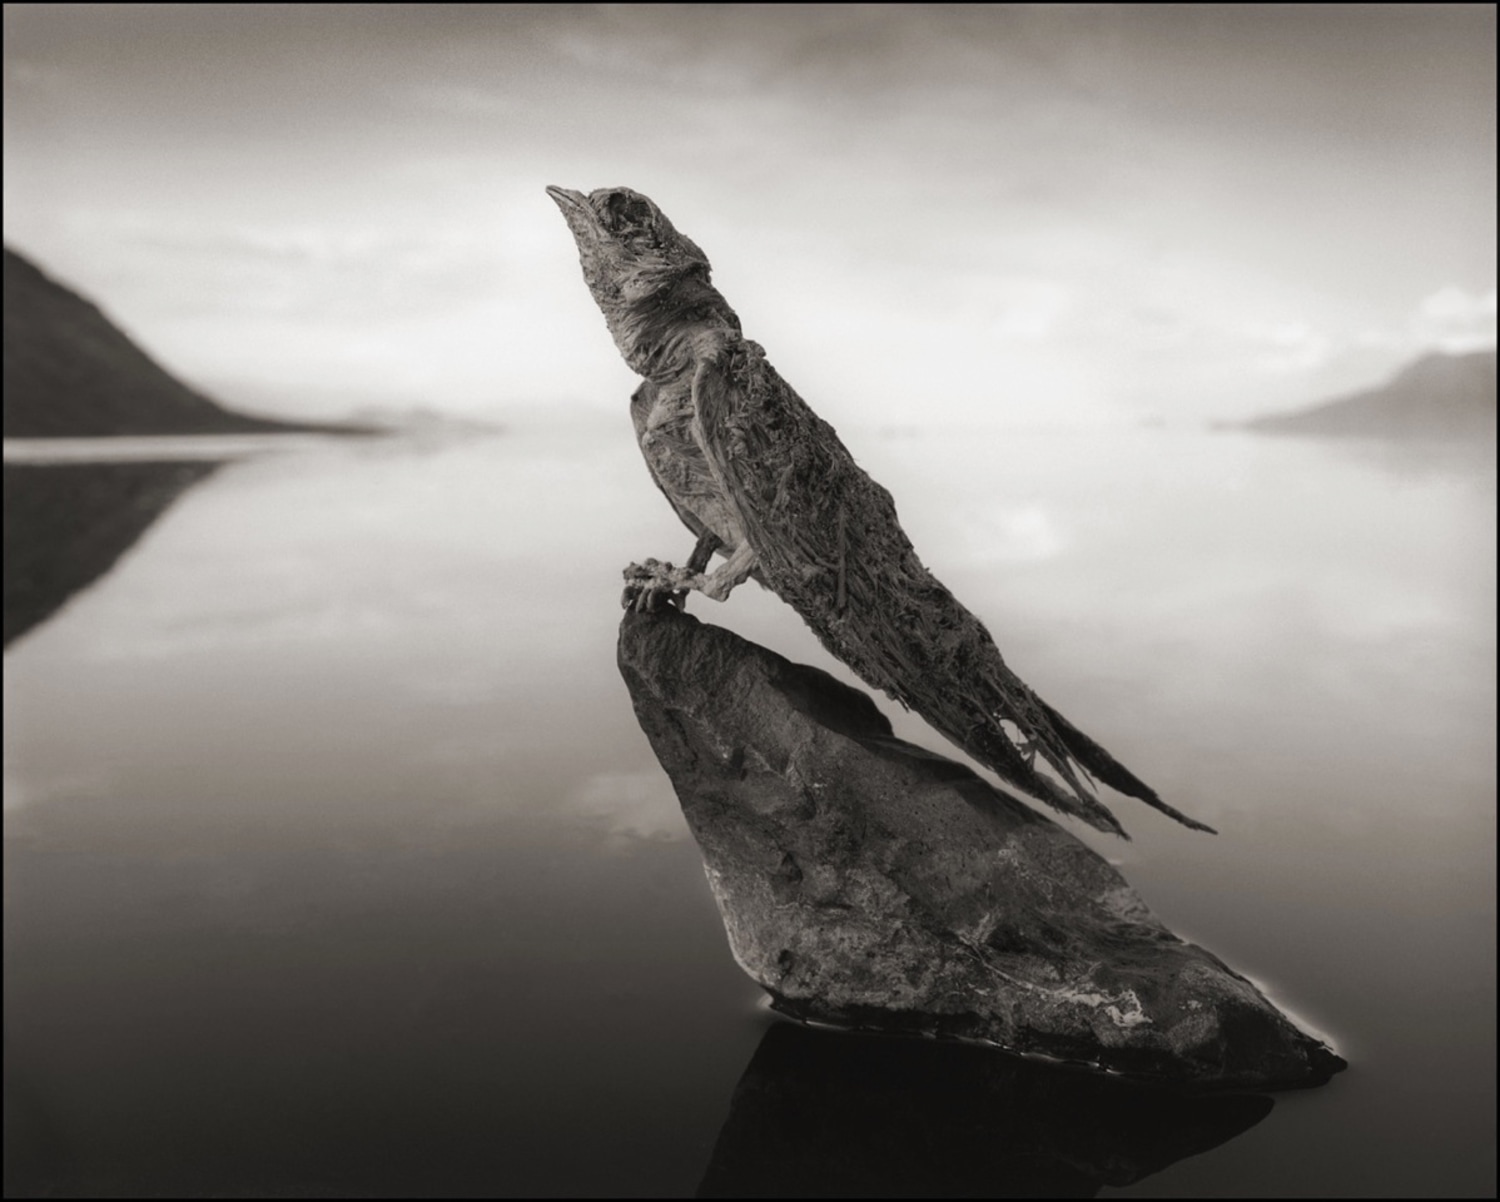 The bird mummies of Natron: Lake's waters petrify animals that fall in